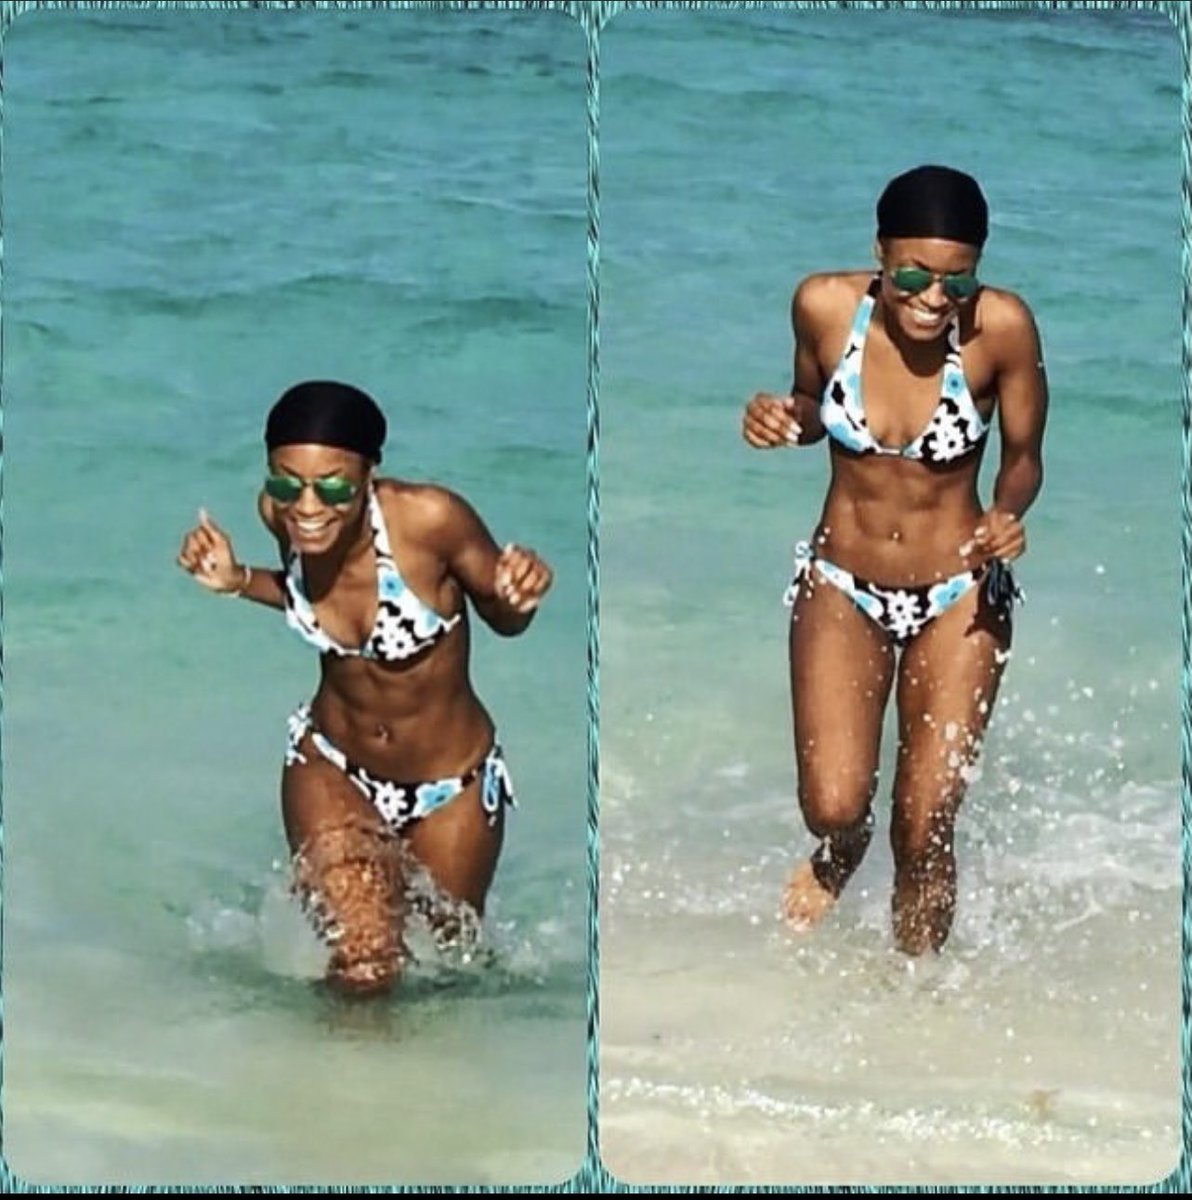 #TBT Always been in shape but adulting comes in the way. Almost back to my 6-pack 😋 #BlackWoman #BeachBabe #StThomas #Melanin #CaribbeanGal #Vacation #SummerBody #NYC #Happiness #MyHappyPlace #Loved